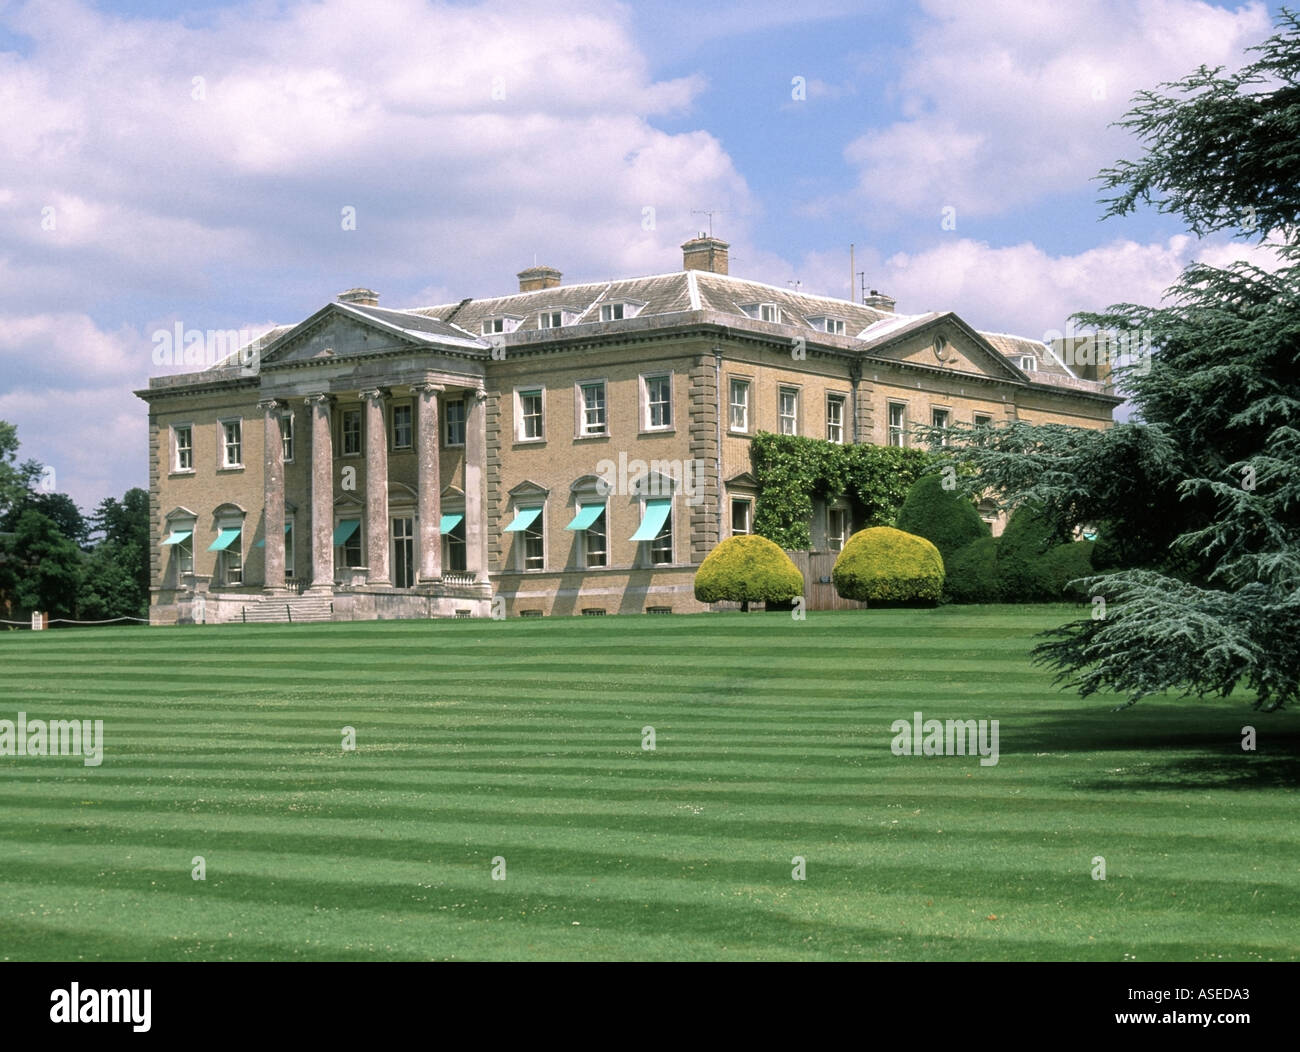 Striped garden lawn & sun blinds Grade I listed Broadlands House Earl and Countess Mountbatten of Burma home near Romsey in Test Valley Hampshire UK Stock Photo